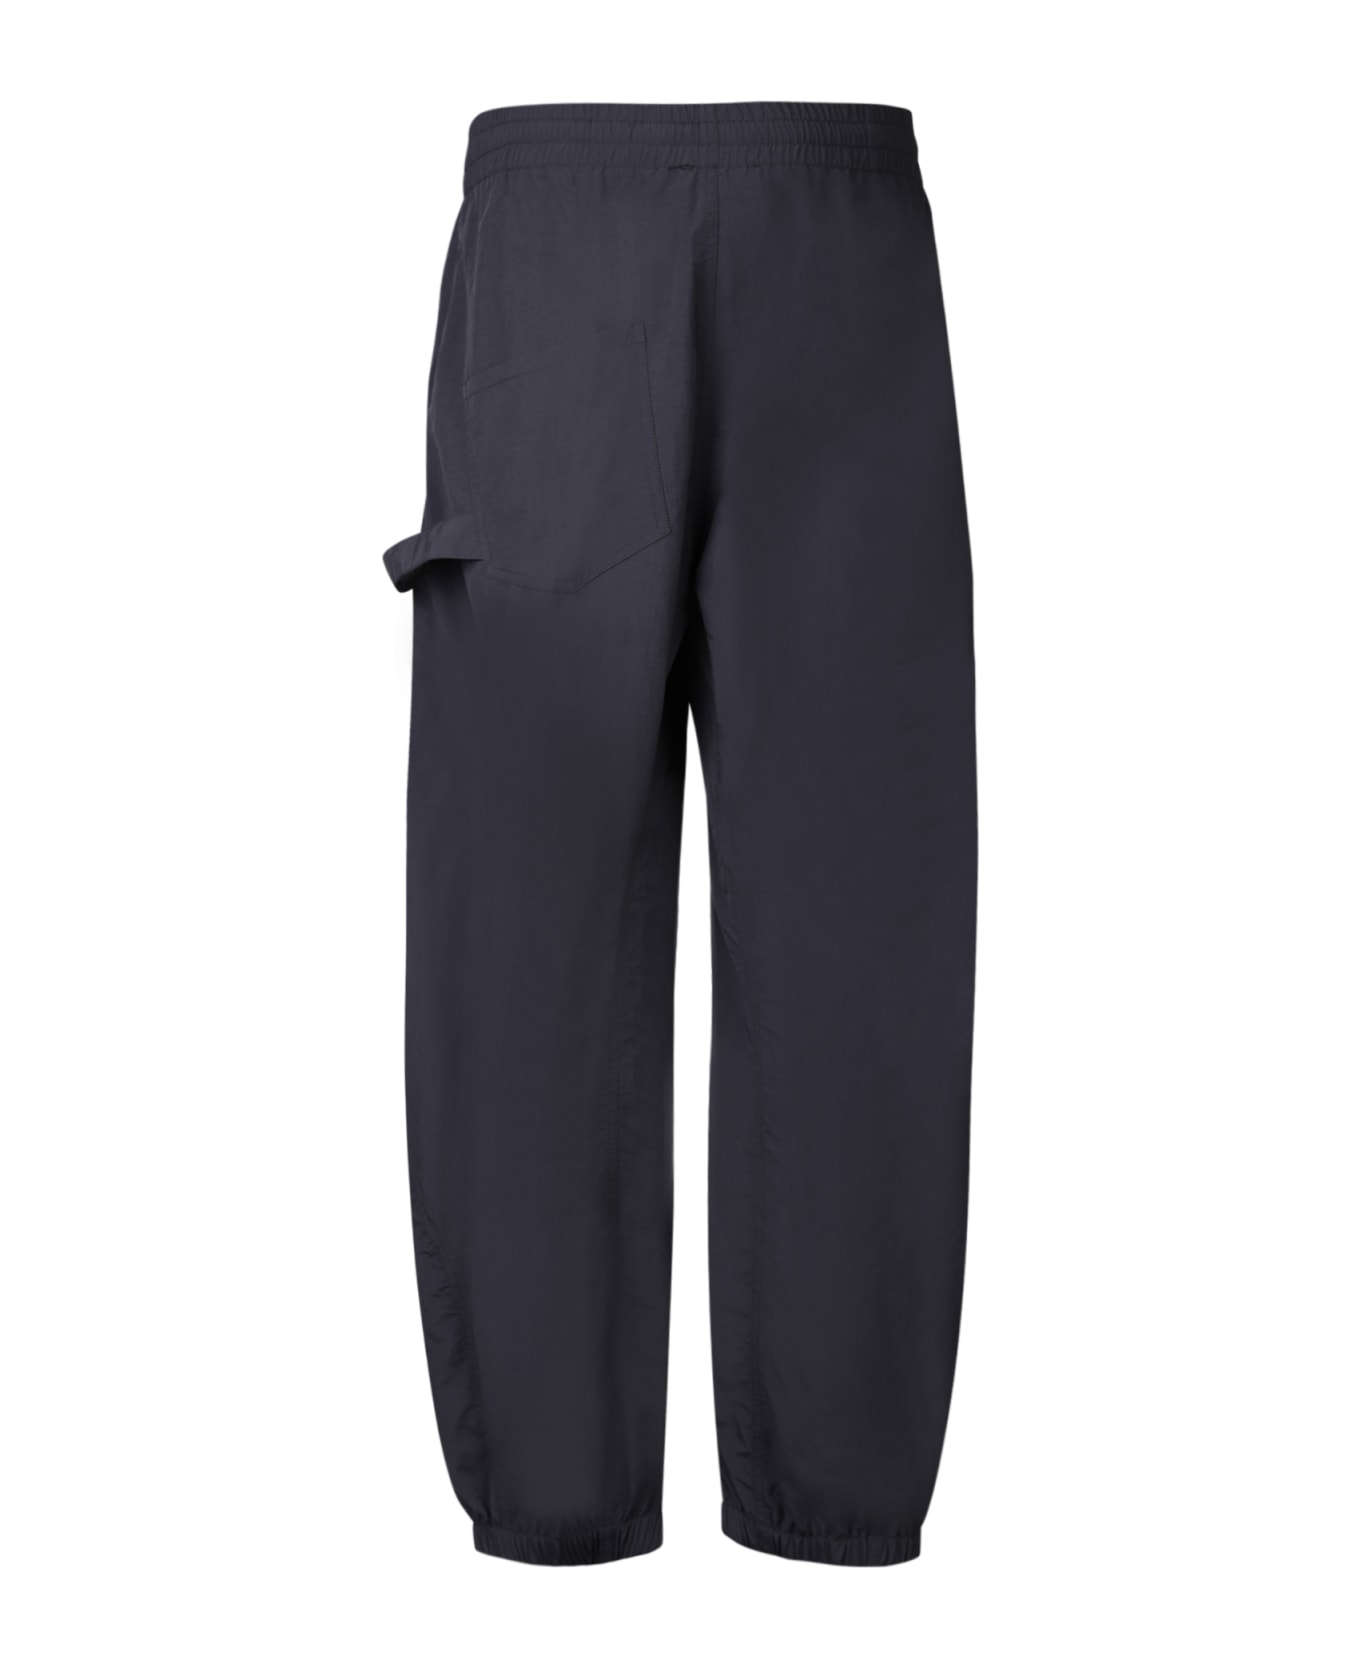 J.W. Anderson Twisted Jogger Pants - Black